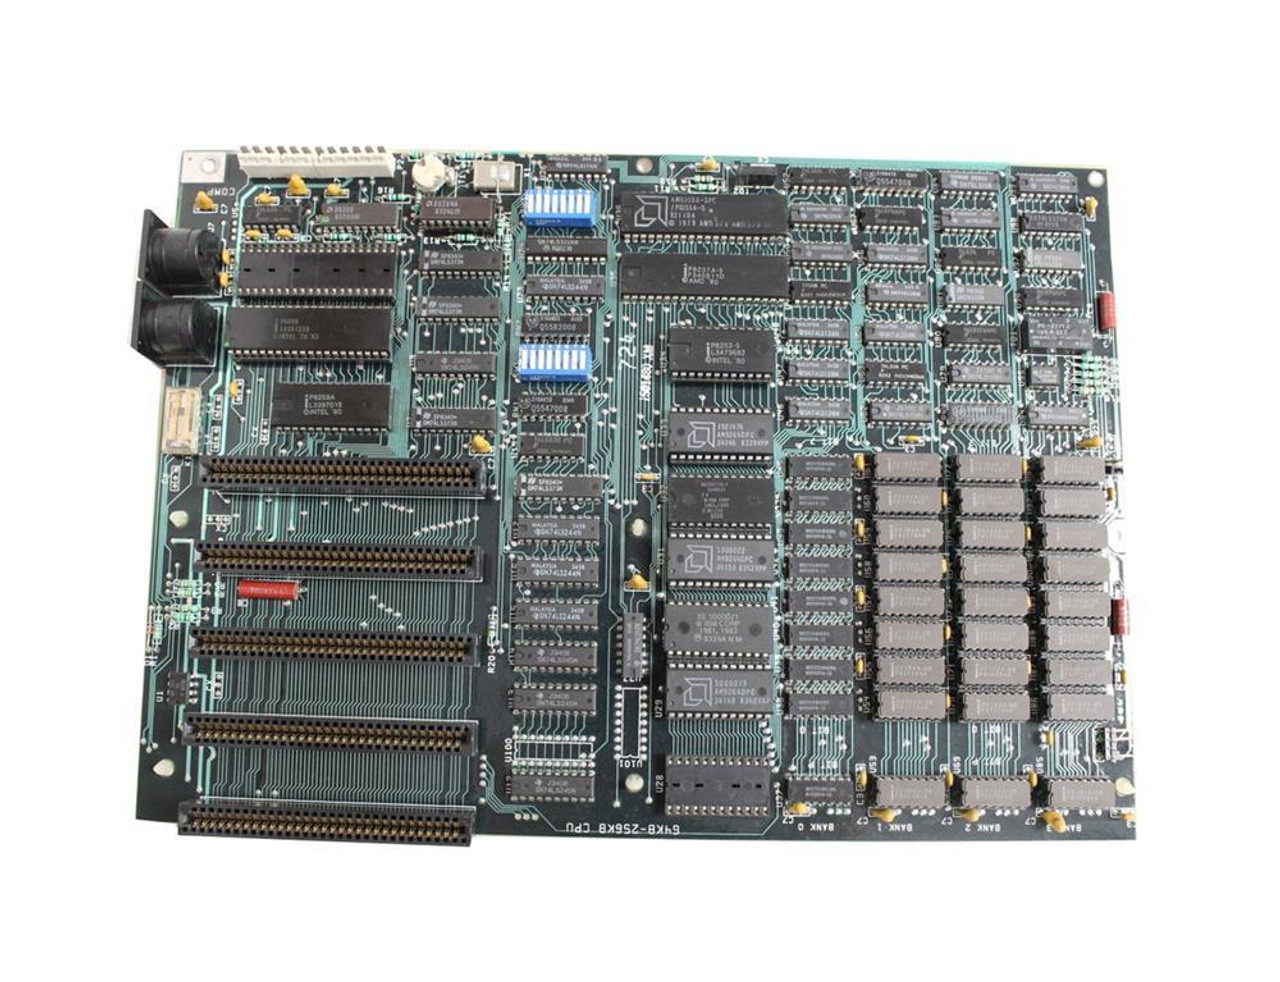 6323740 IBM PC/XT System Board WITH 256K / 8088 CPU (Refurbished)